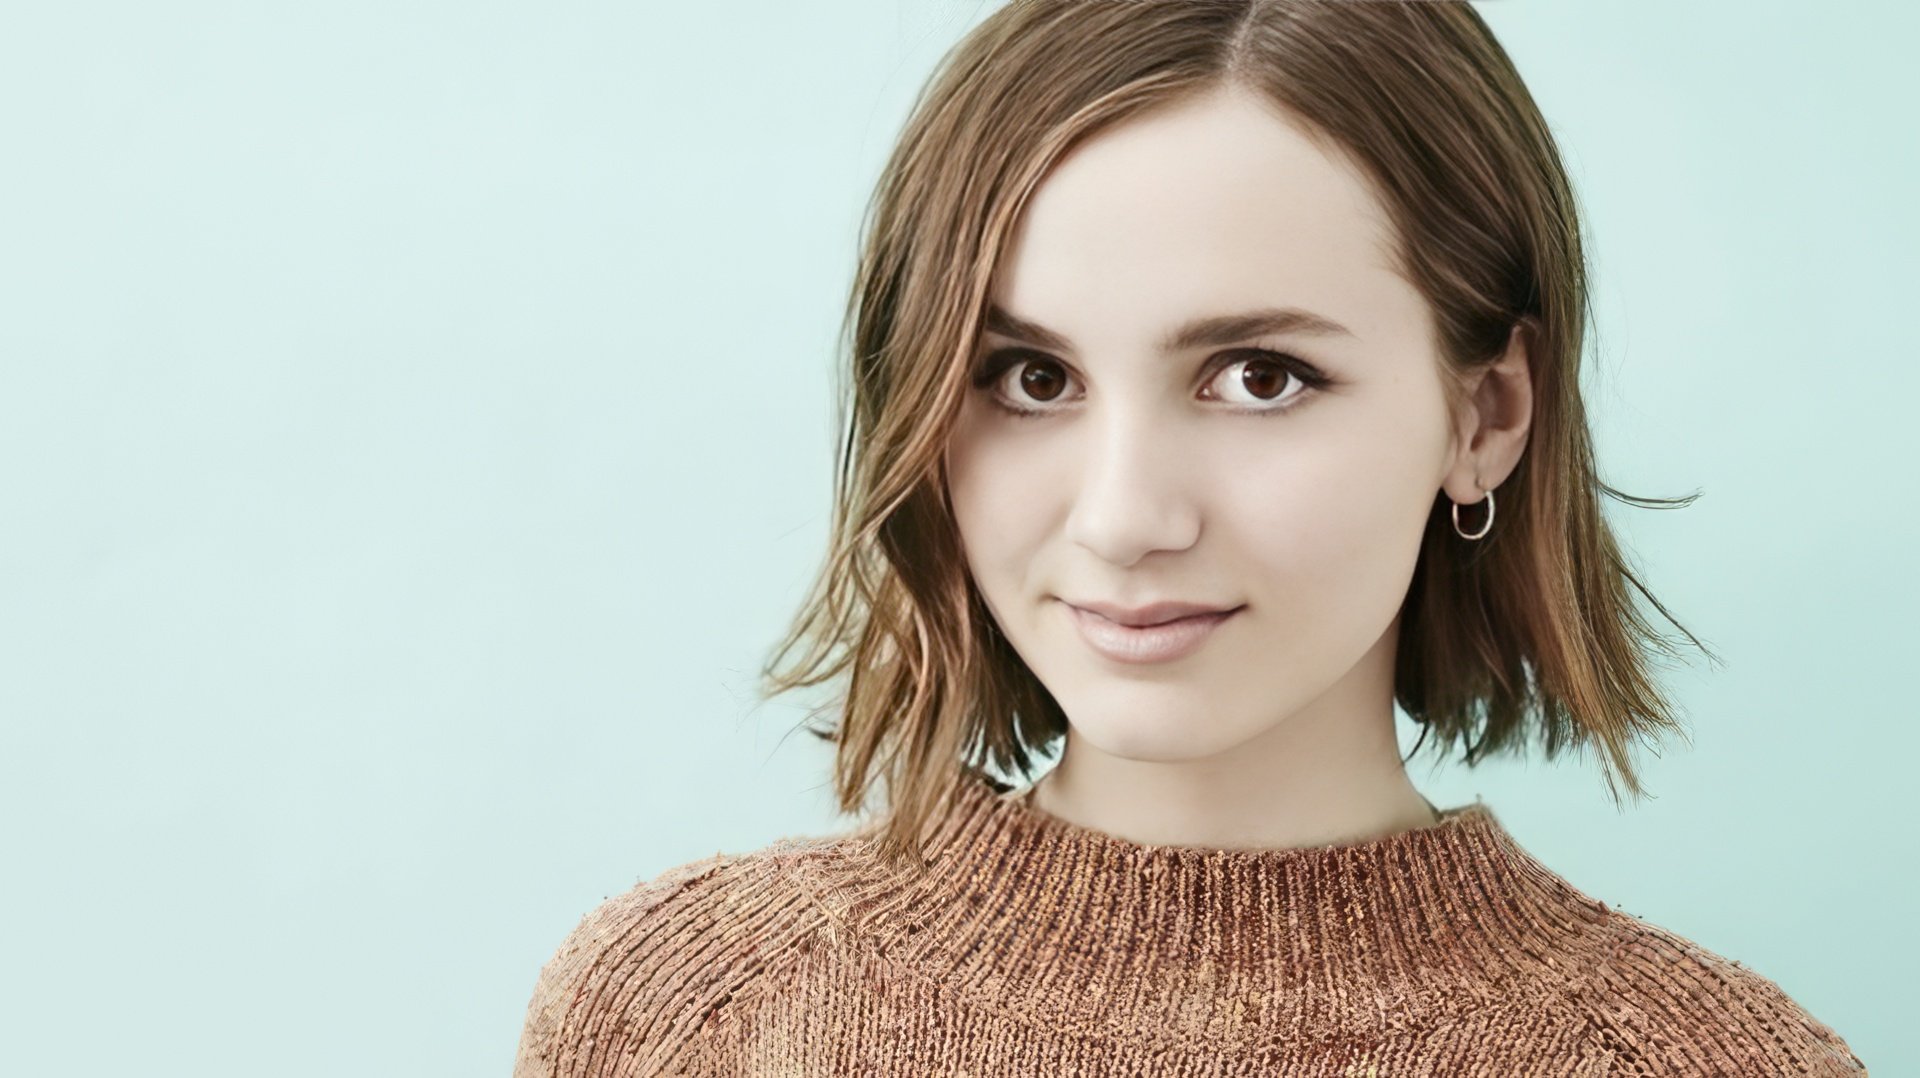 In the photo: Maude Apatow